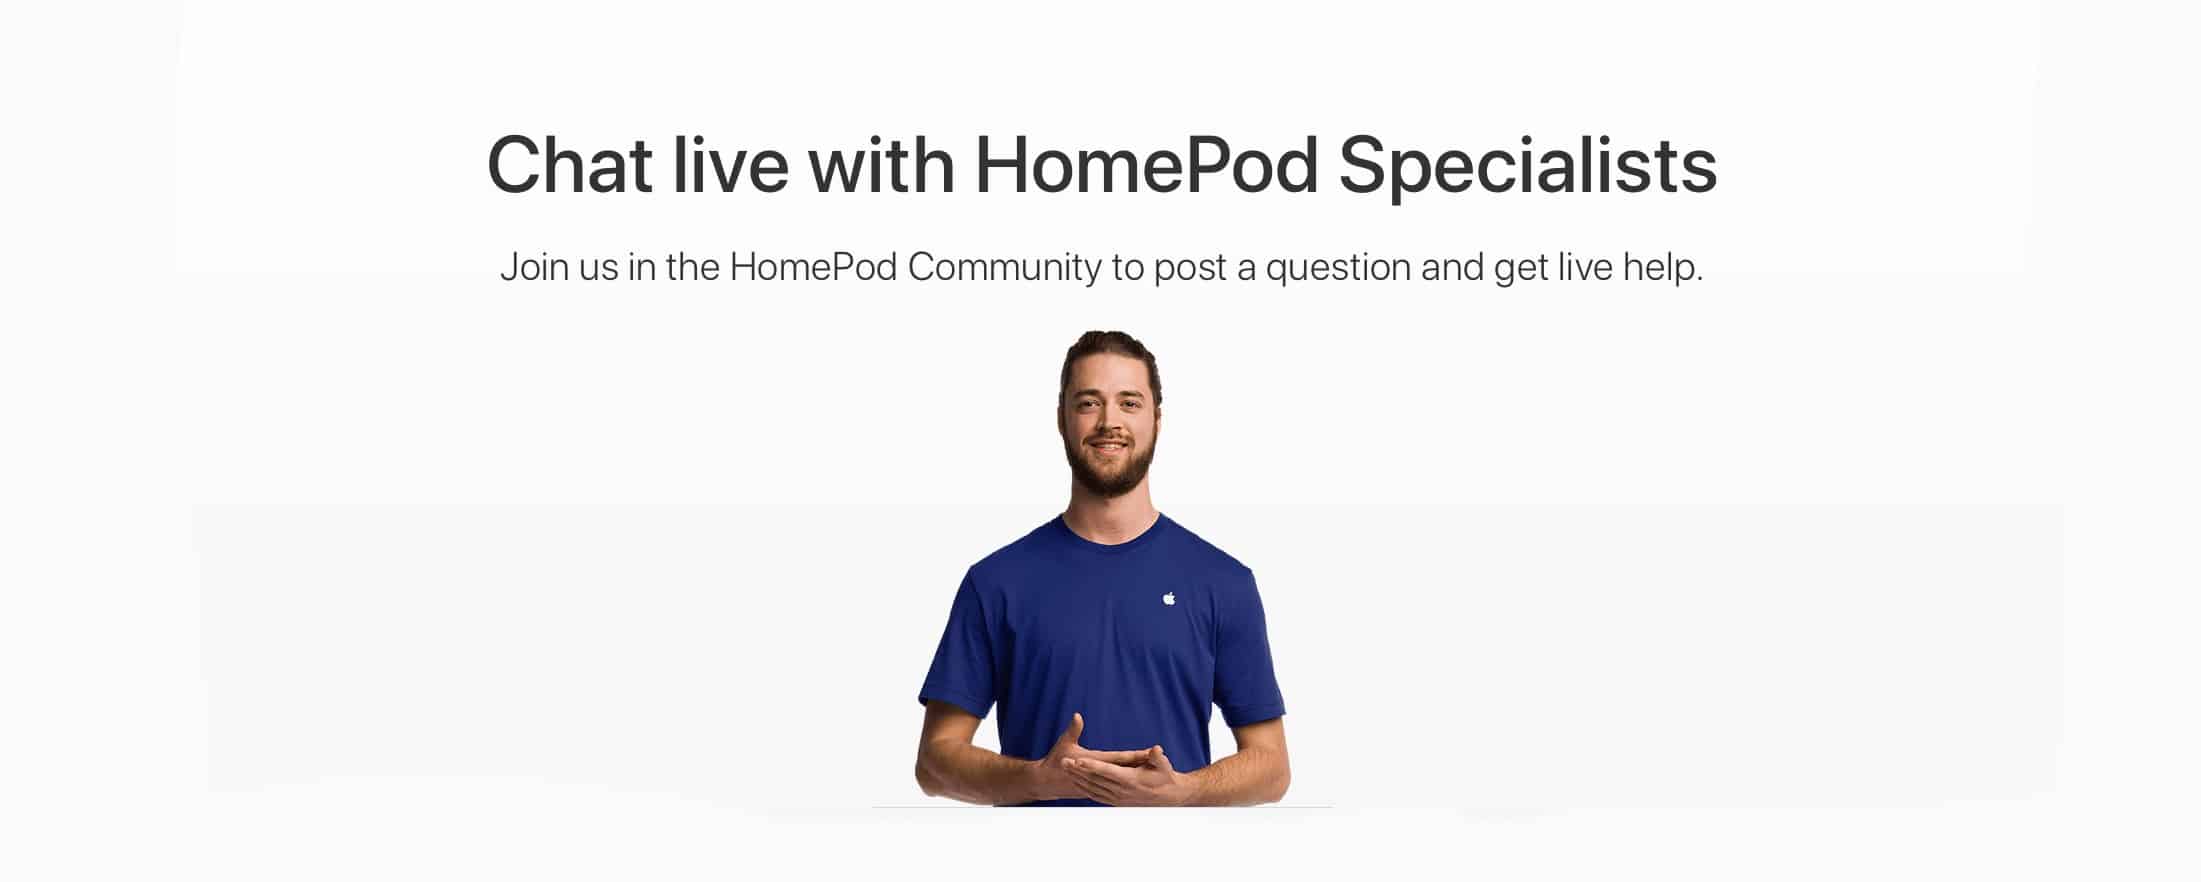 Apple will provide HomePod tech support at a special online event in a few days. Get your questions ready.